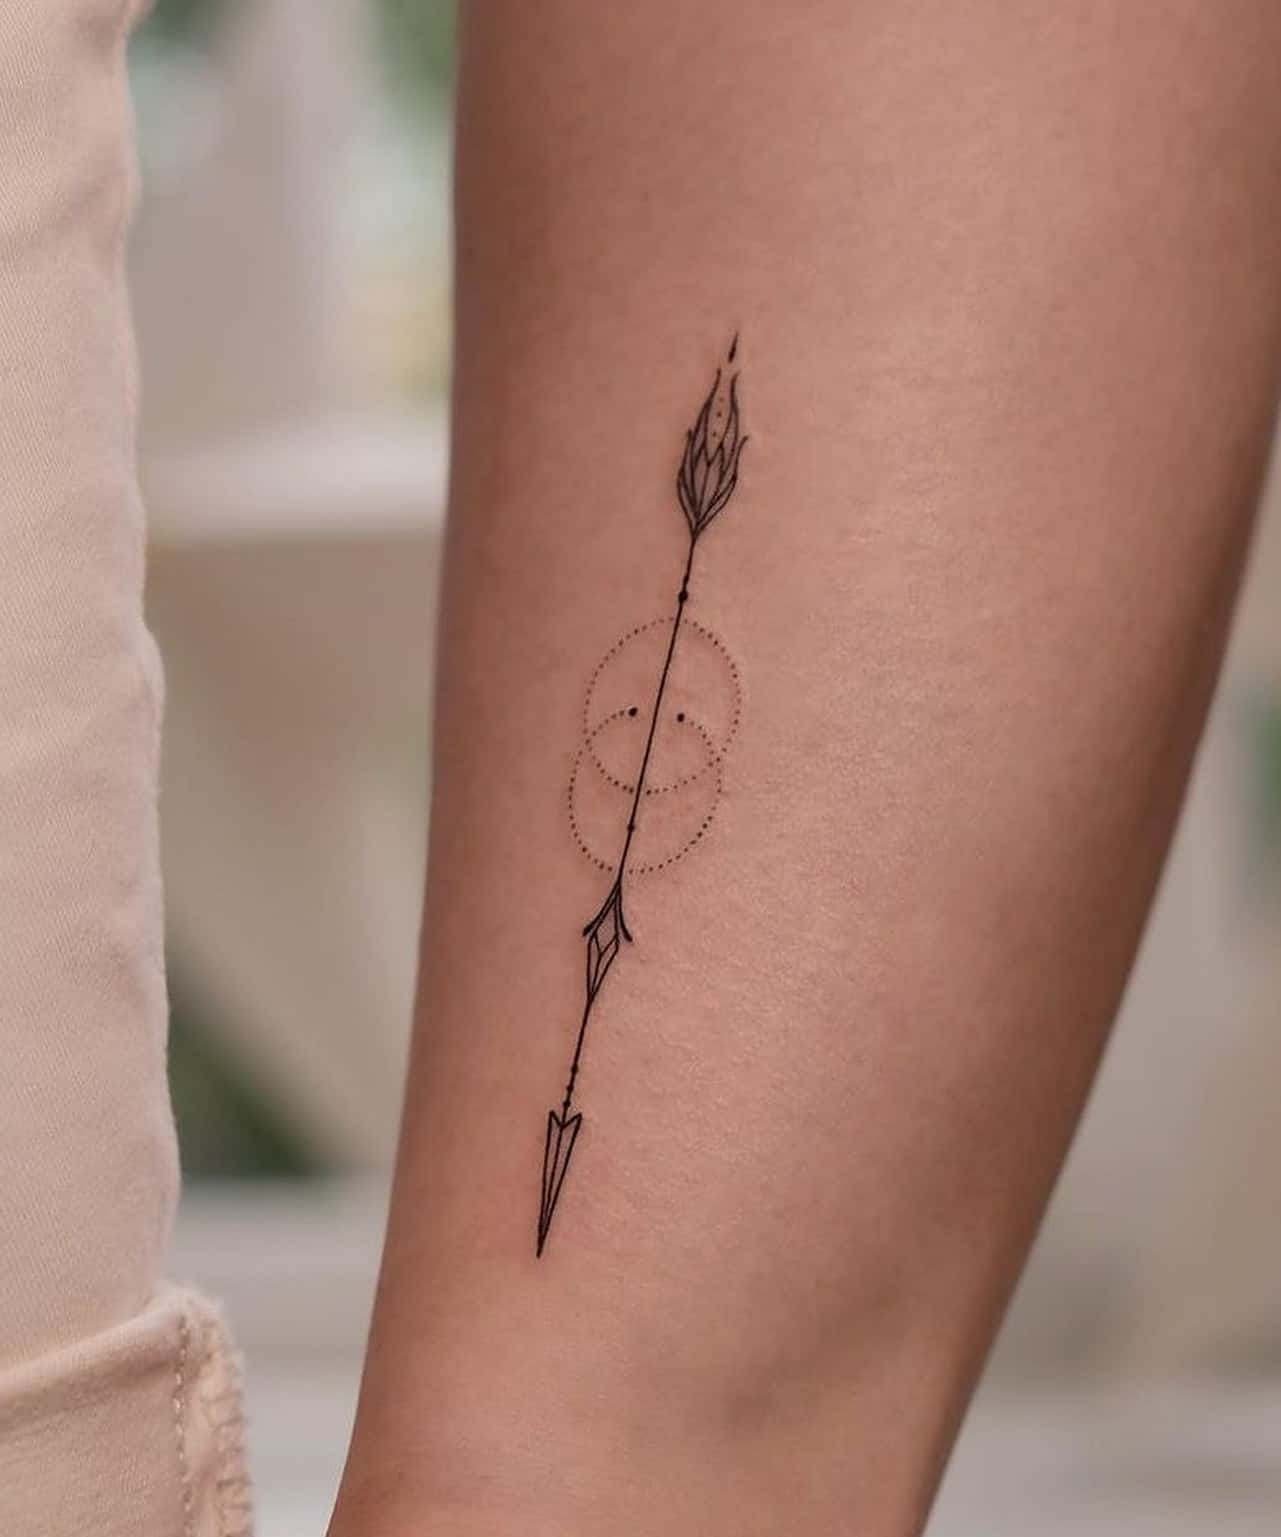 What does an arrow tattoo represent